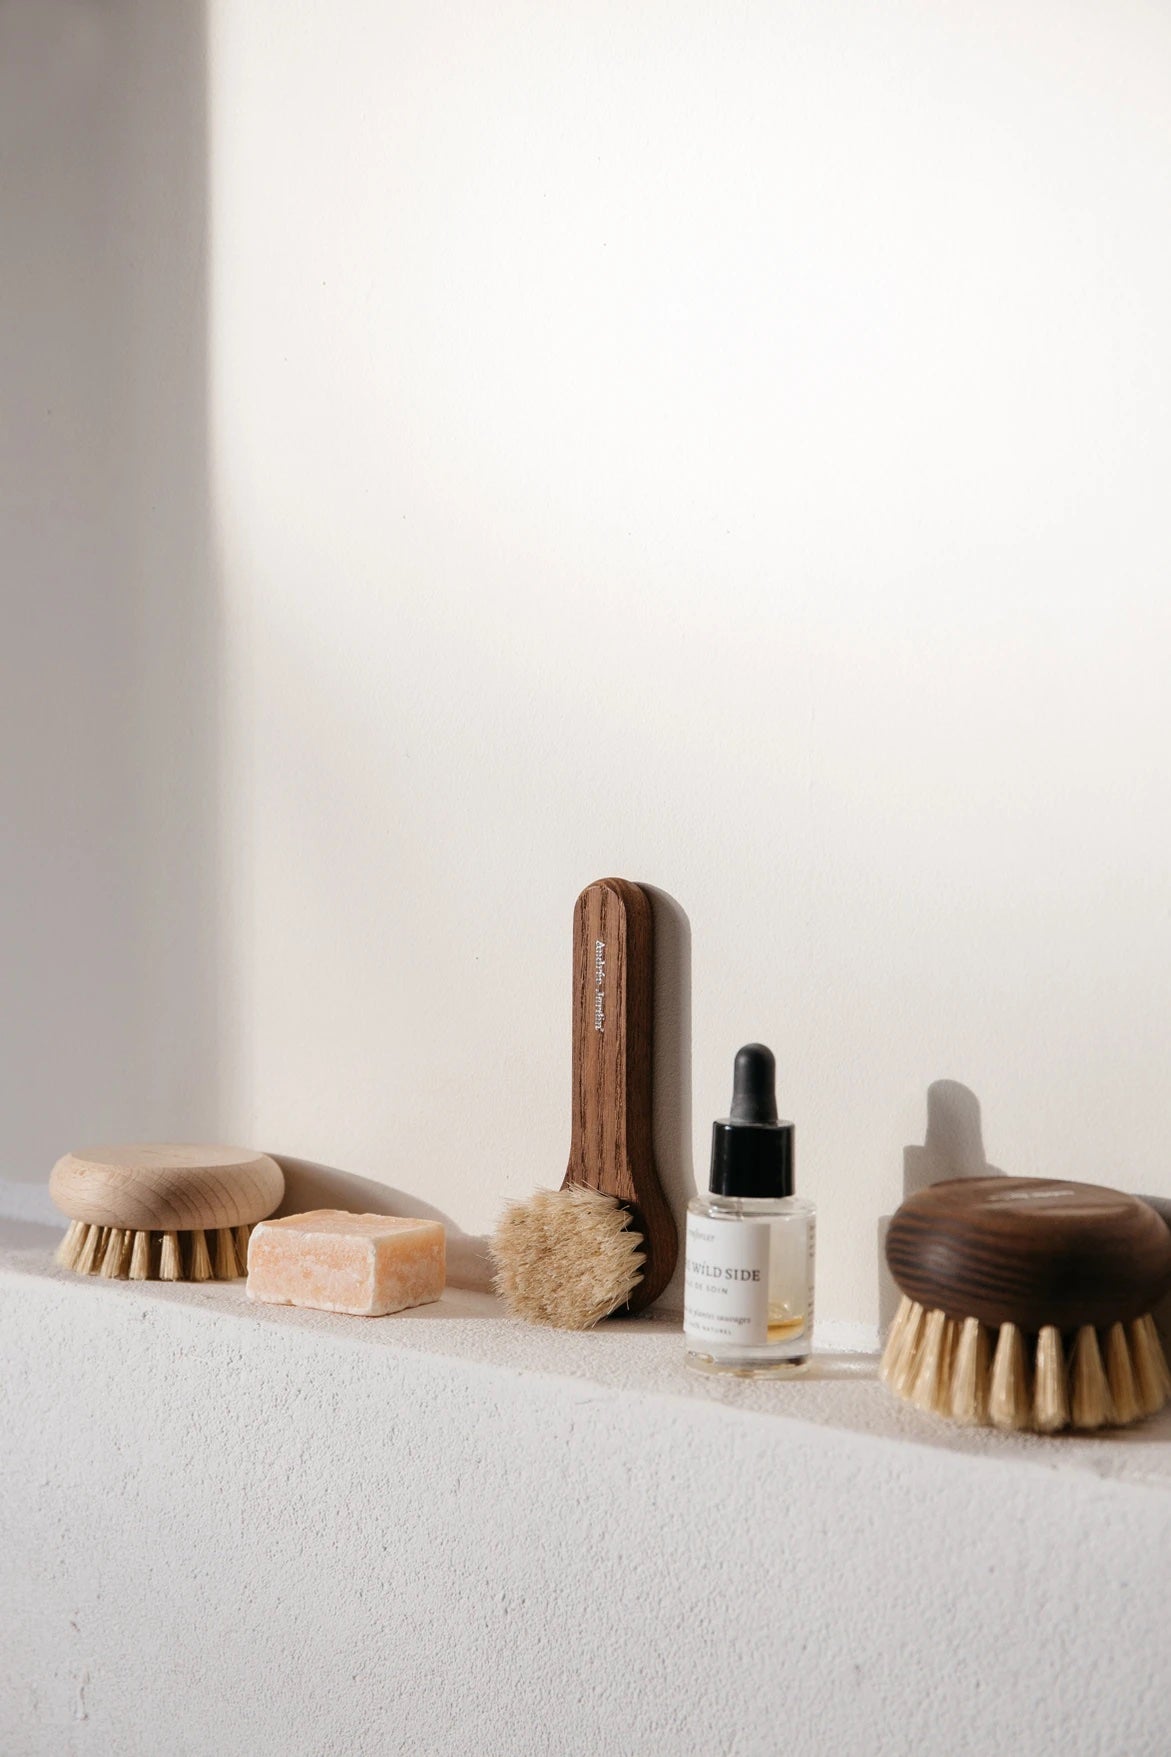 A collection of eco-friendly spa products, including Andrée Jardin Heritage Face Cleansing Brush Heat-Treated Ash Wood brushes and a bottle of oil, neatly arranged on a white ledge against a light gray wall.